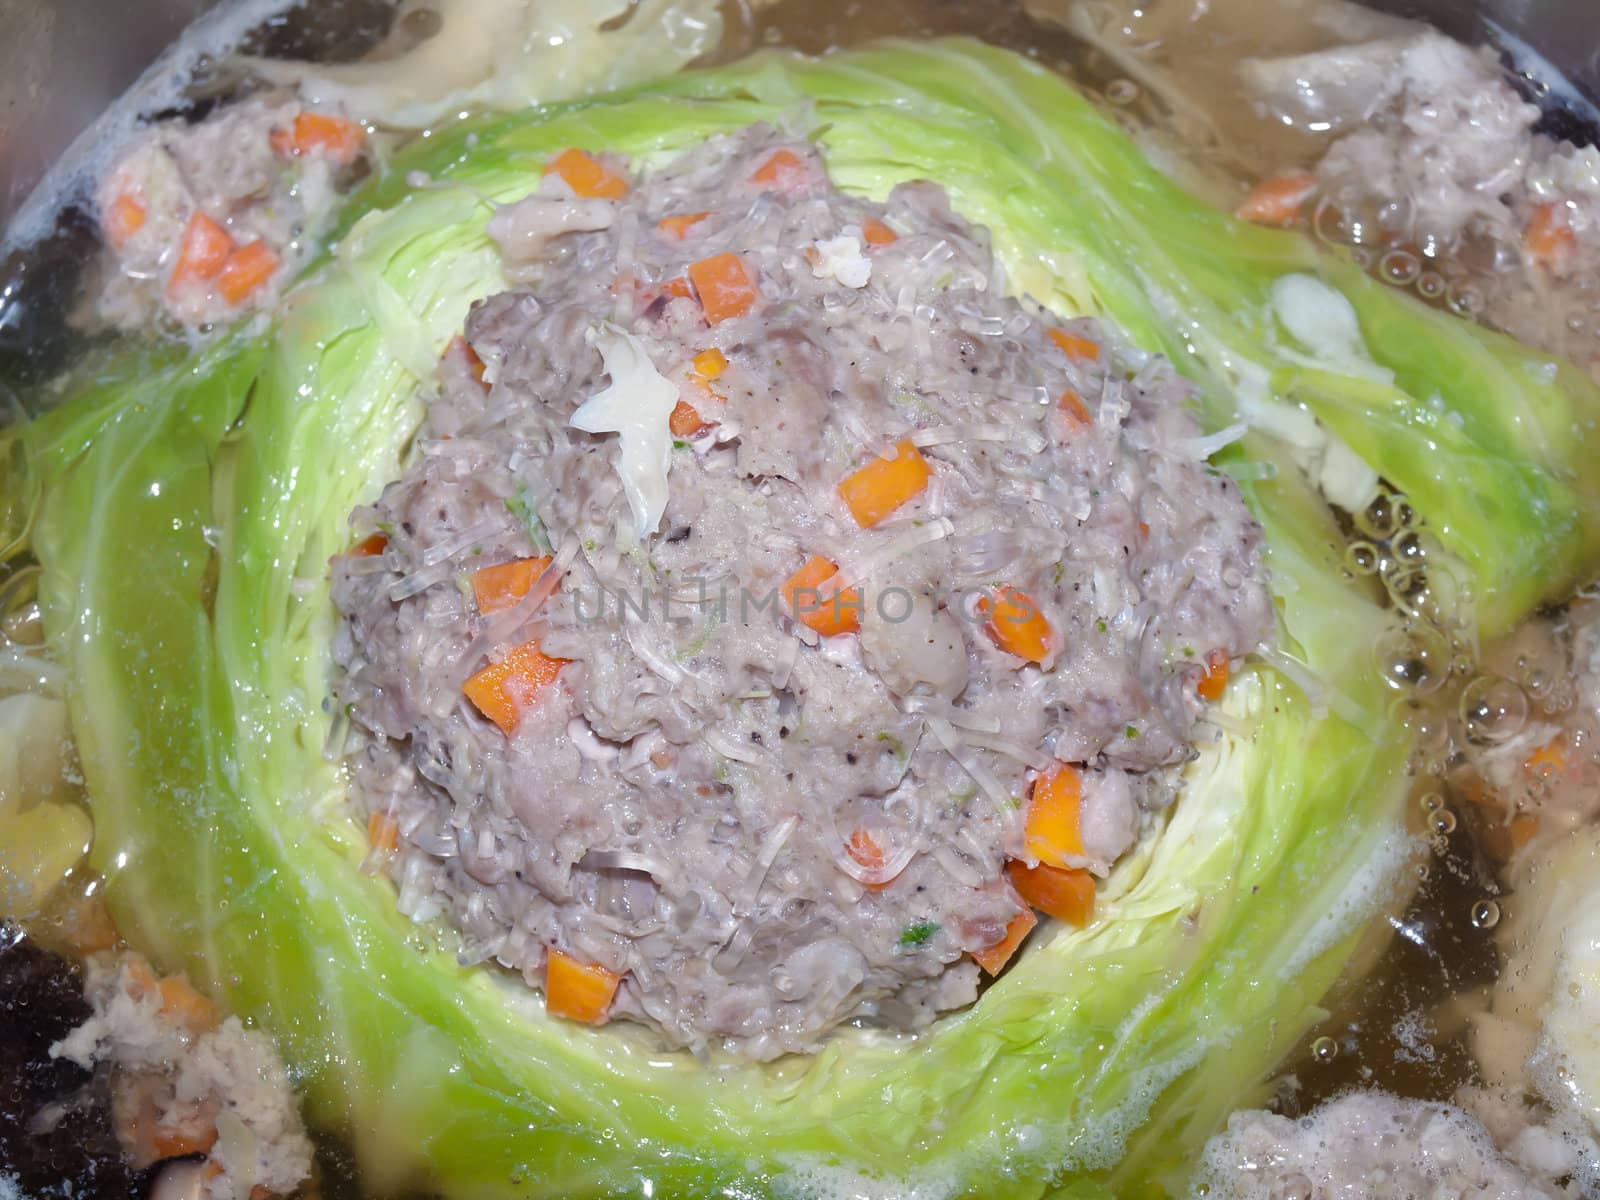 Stuffed cabbage by Exsodus